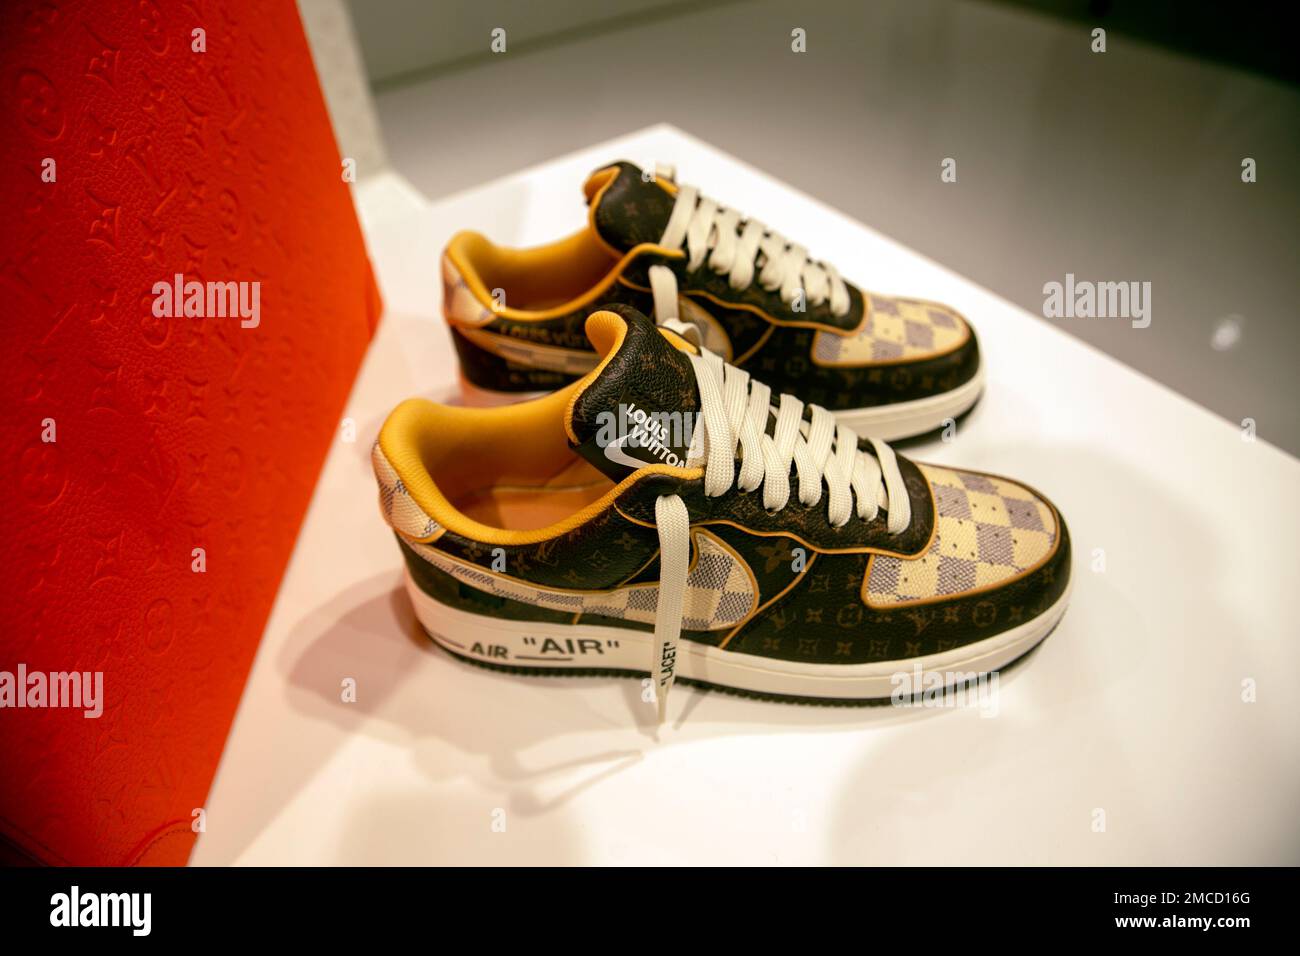 A pair of Louis Vuitton x Nike Air Force 1s sneakers by designer